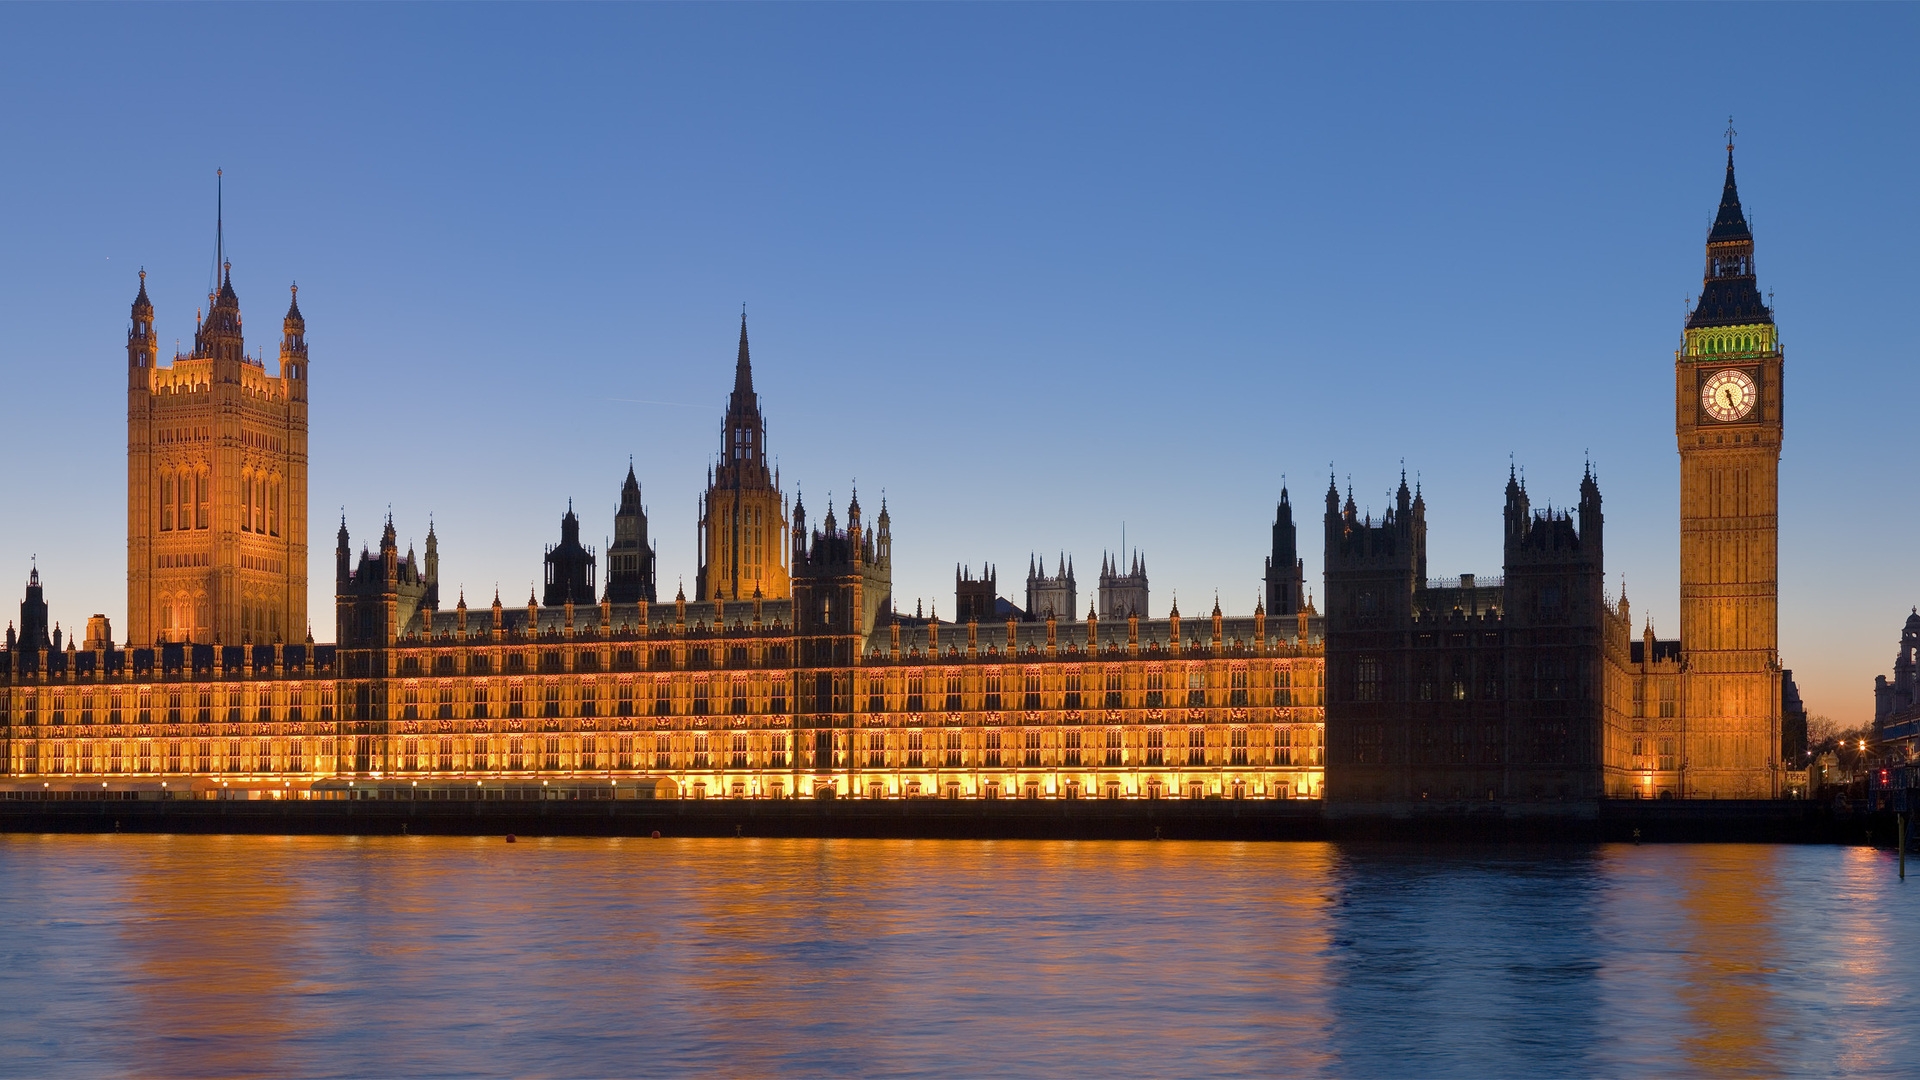 Parliament Building London for 1920 x 1080 HDTV 1080p resolution